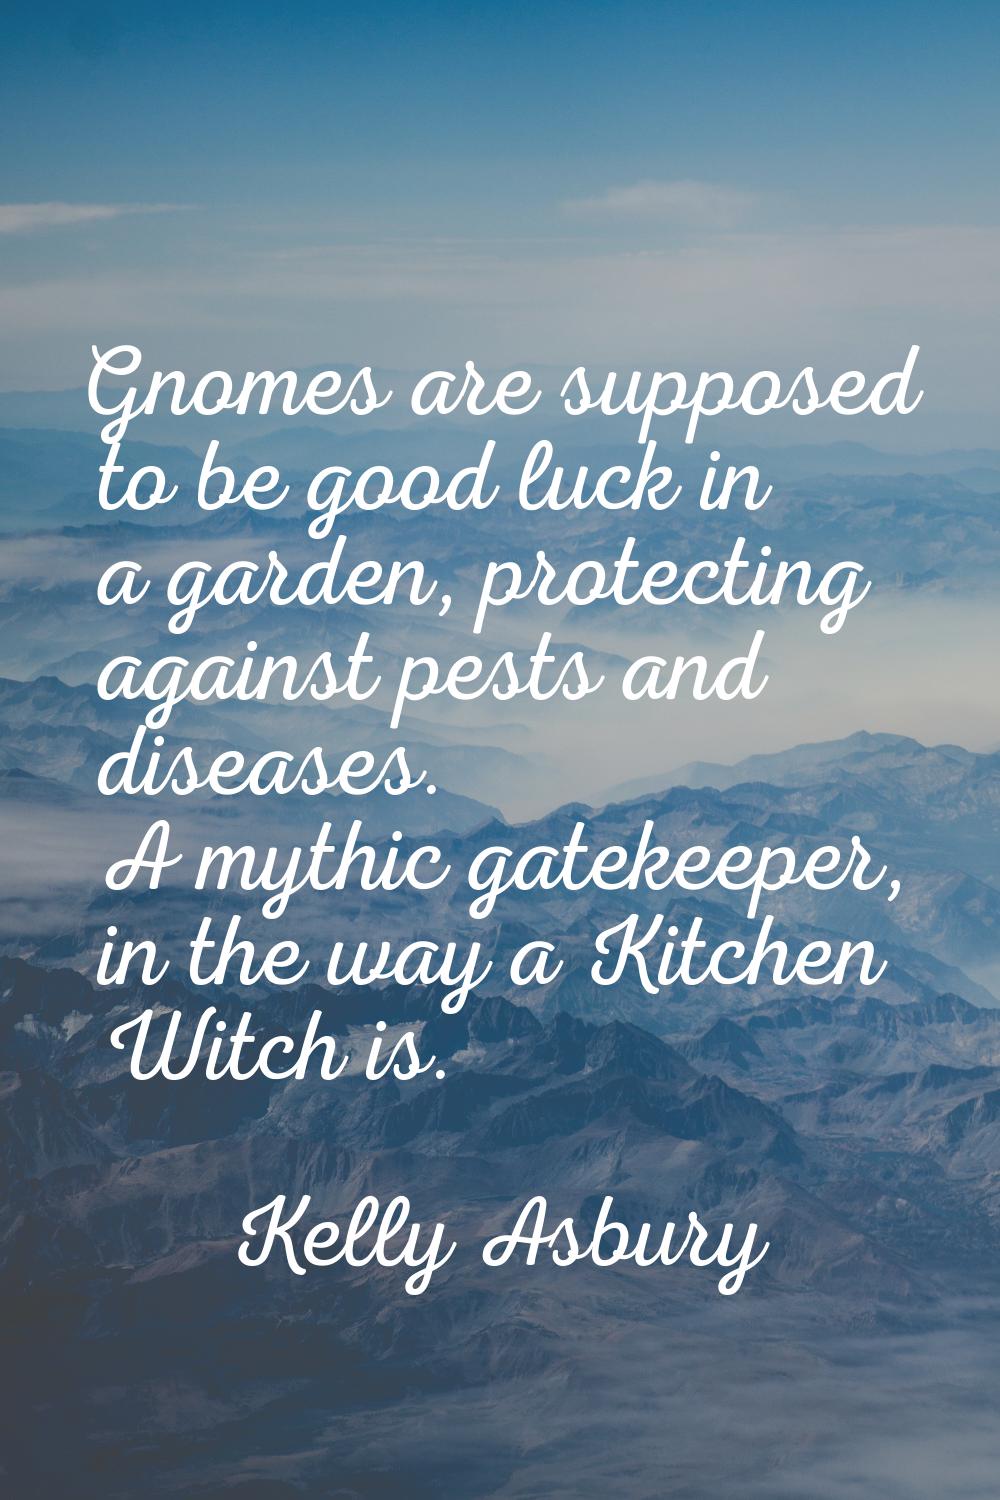 Gnomes are supposed to be good luck in a garden, protecting against pests and diseases. A mythic ga